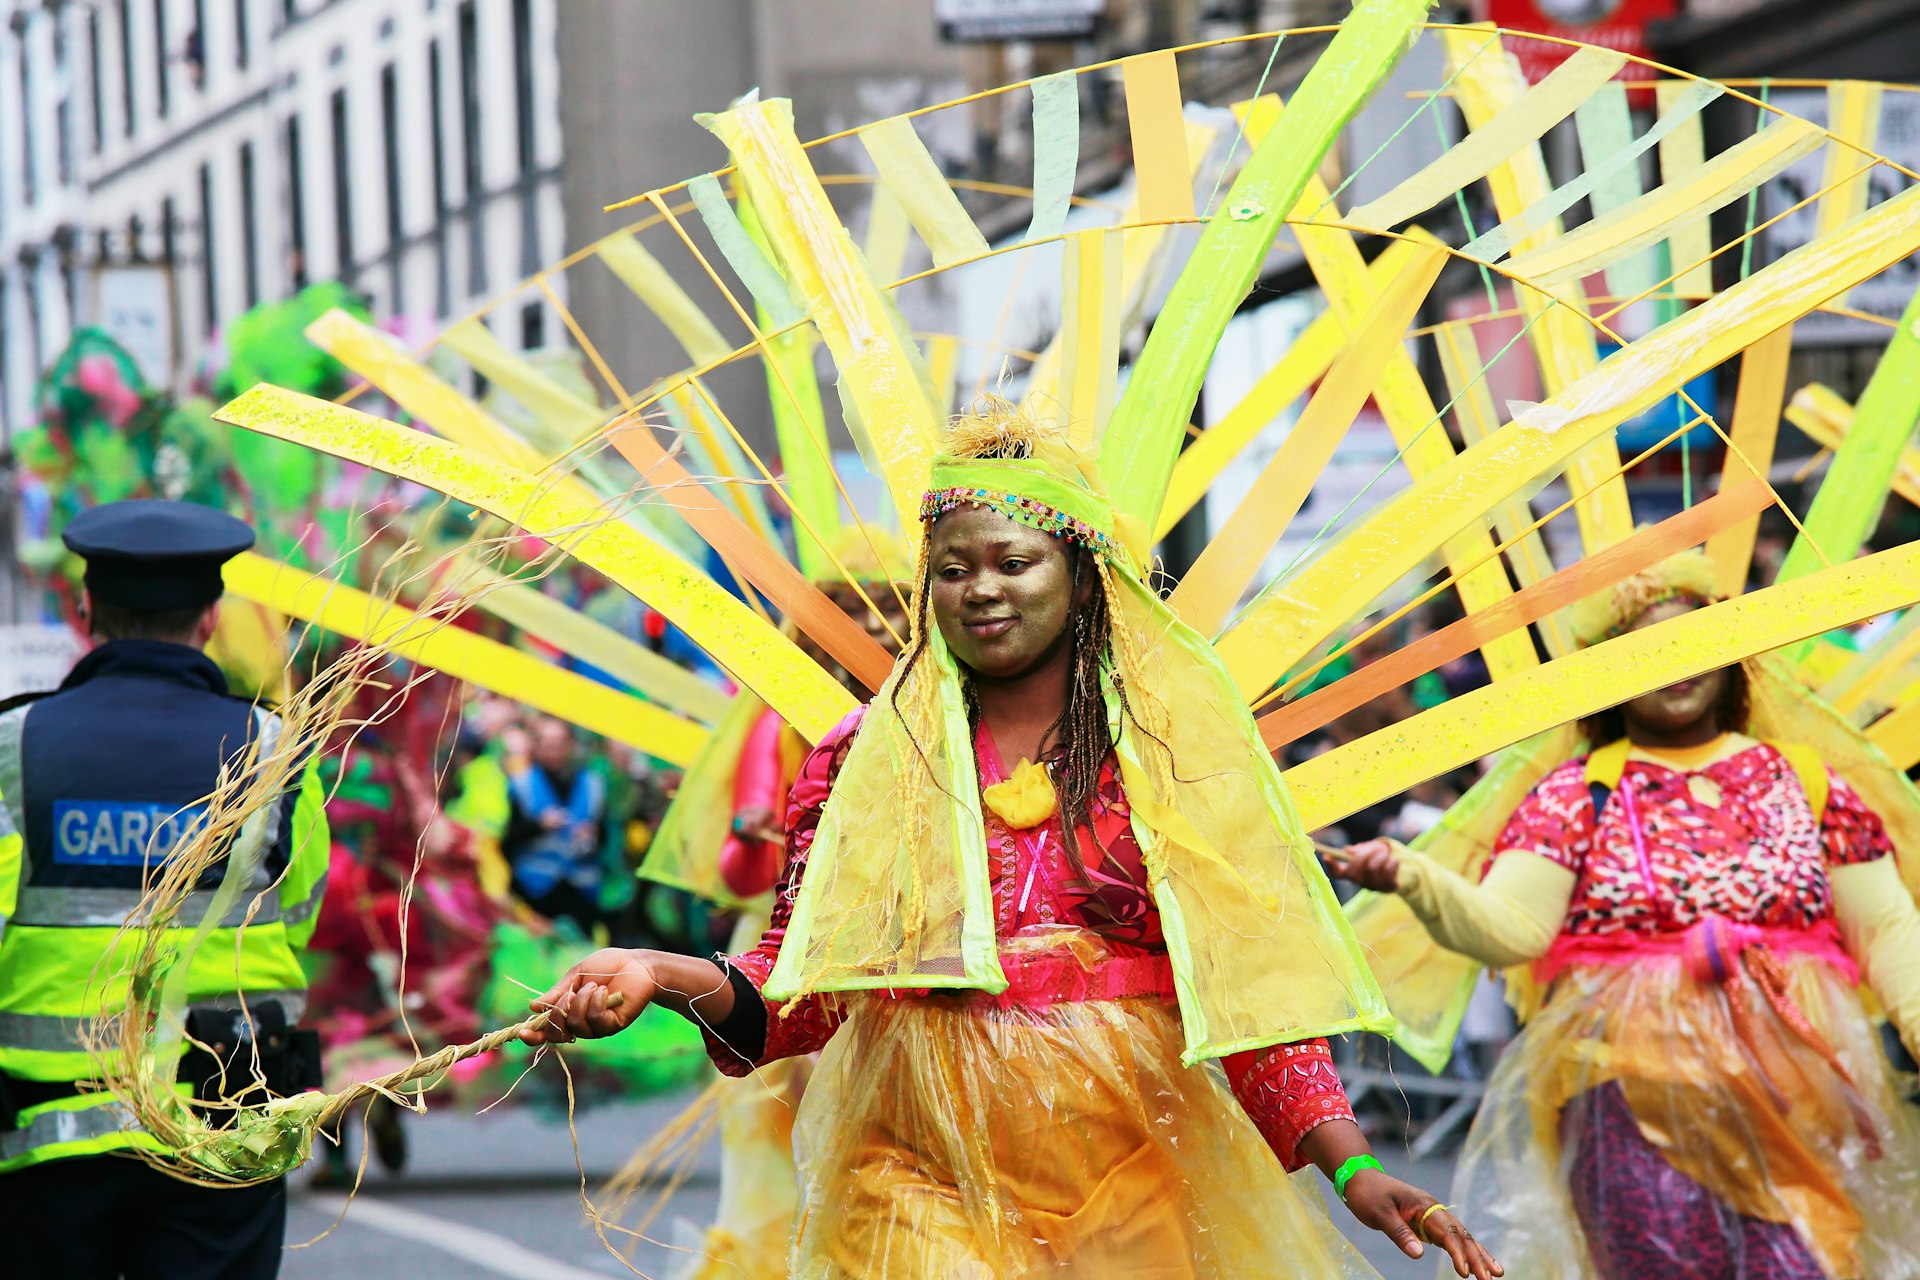 A woman in a festive yellow costume and gold face paint at the St Patrick’s Day parade, Dublin, Ireland